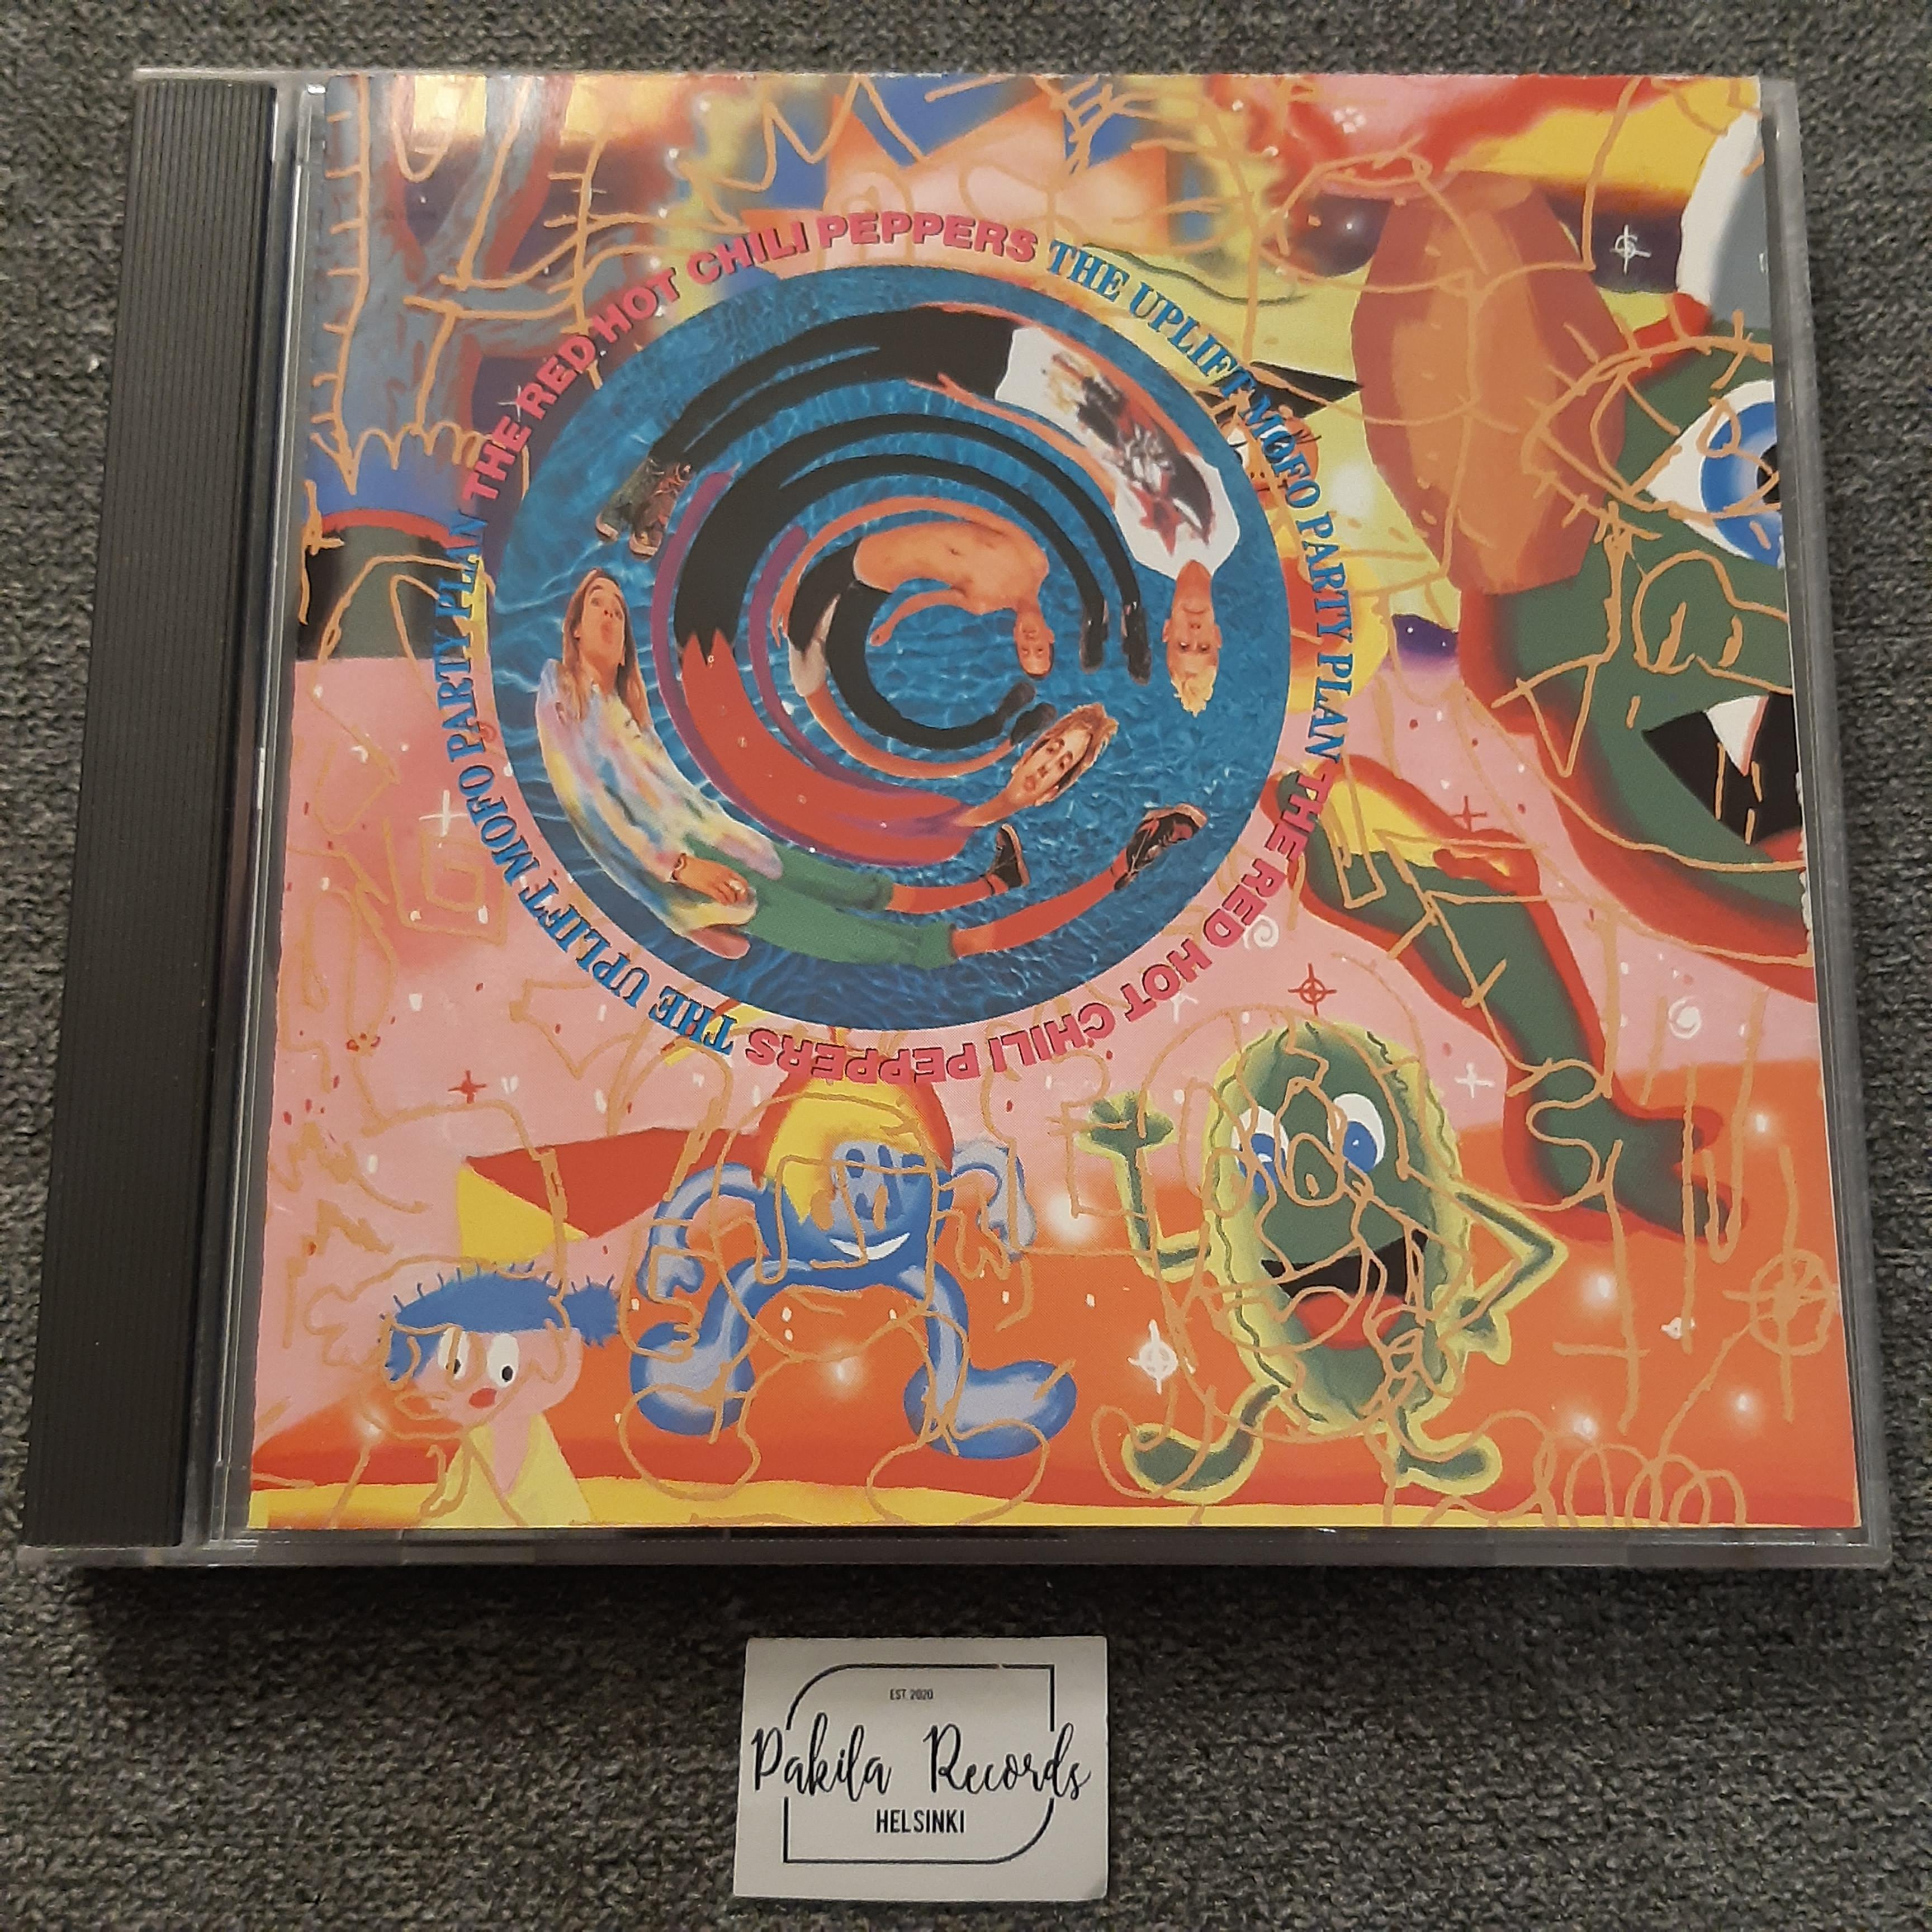 The Red Hot Chili Peppers - The Uplift Mofo Party Plan - CD (käytetty)